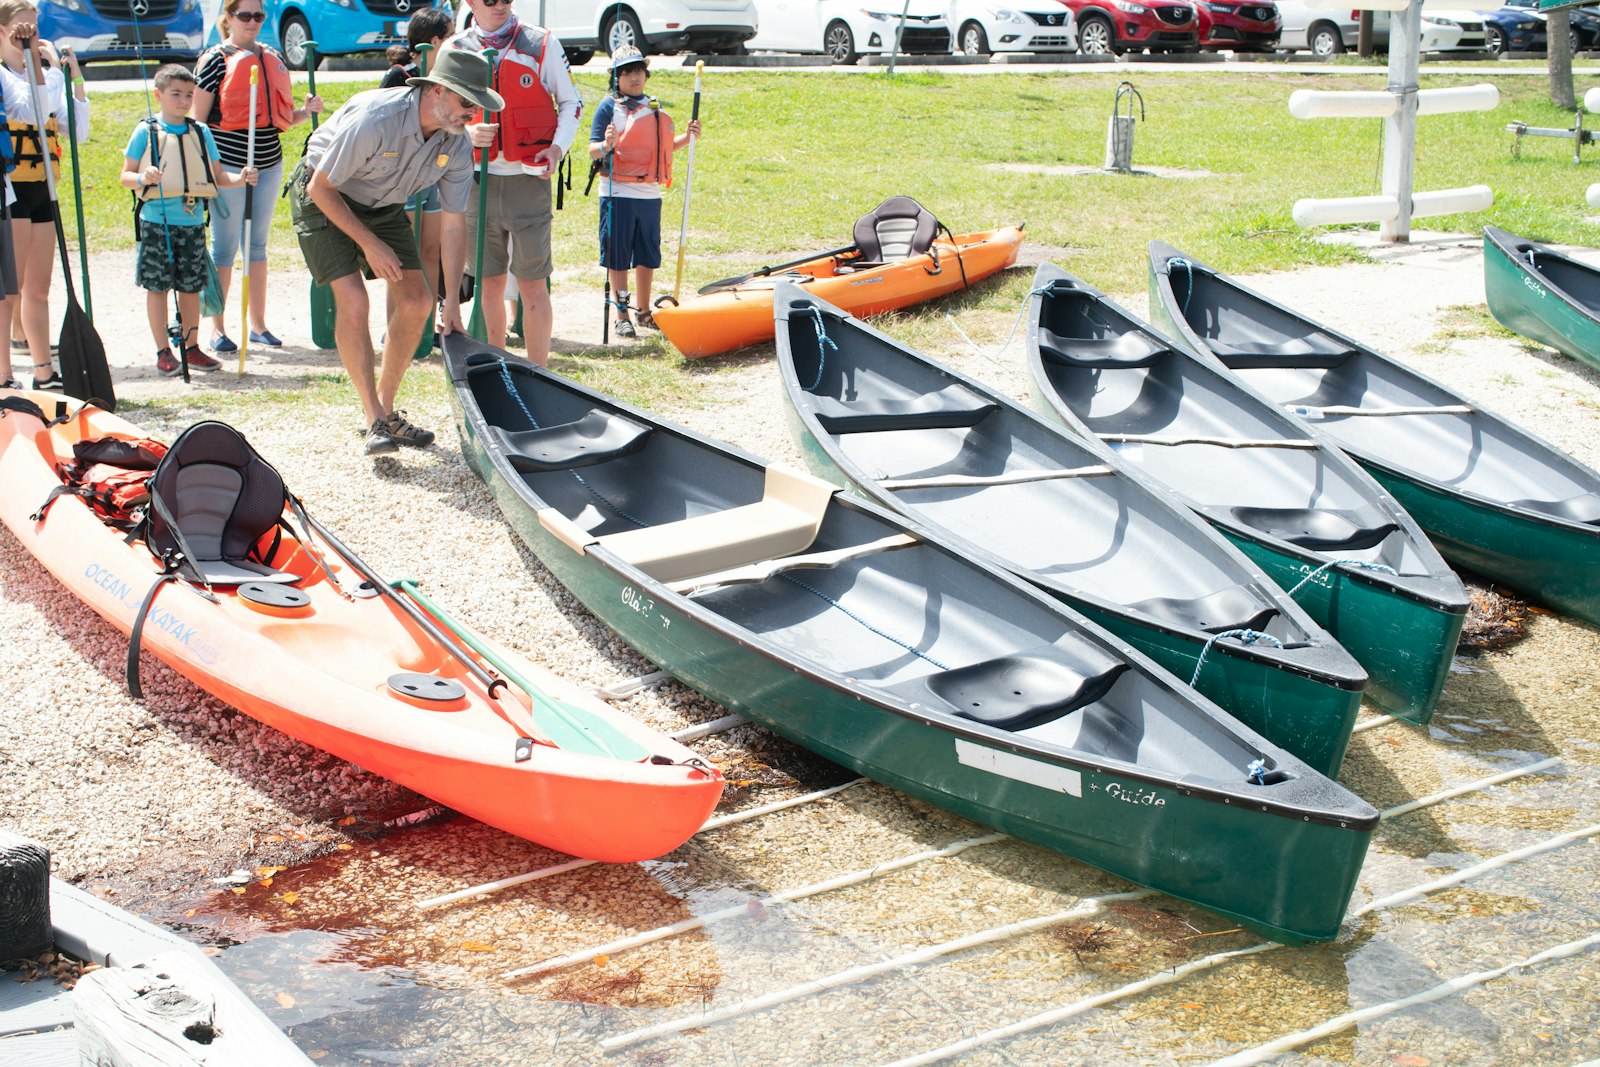 Canoes lined up on a beach